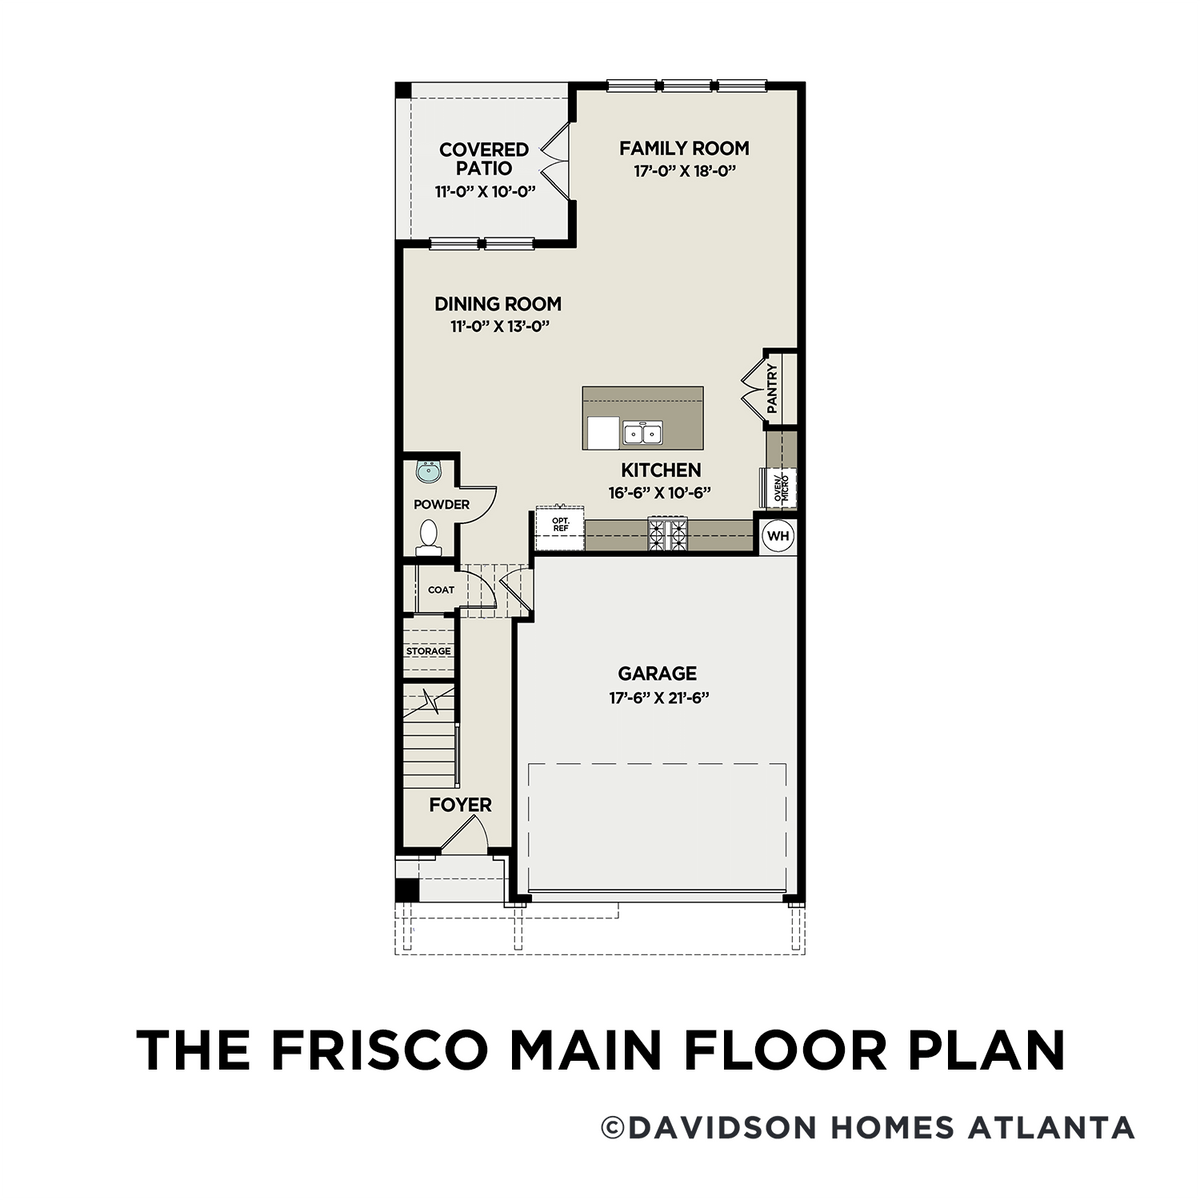 1 - The Frisco A floor plan layout for 695 Stickley Oak Way in Davidson Homes' The Village at Towne Lake community.